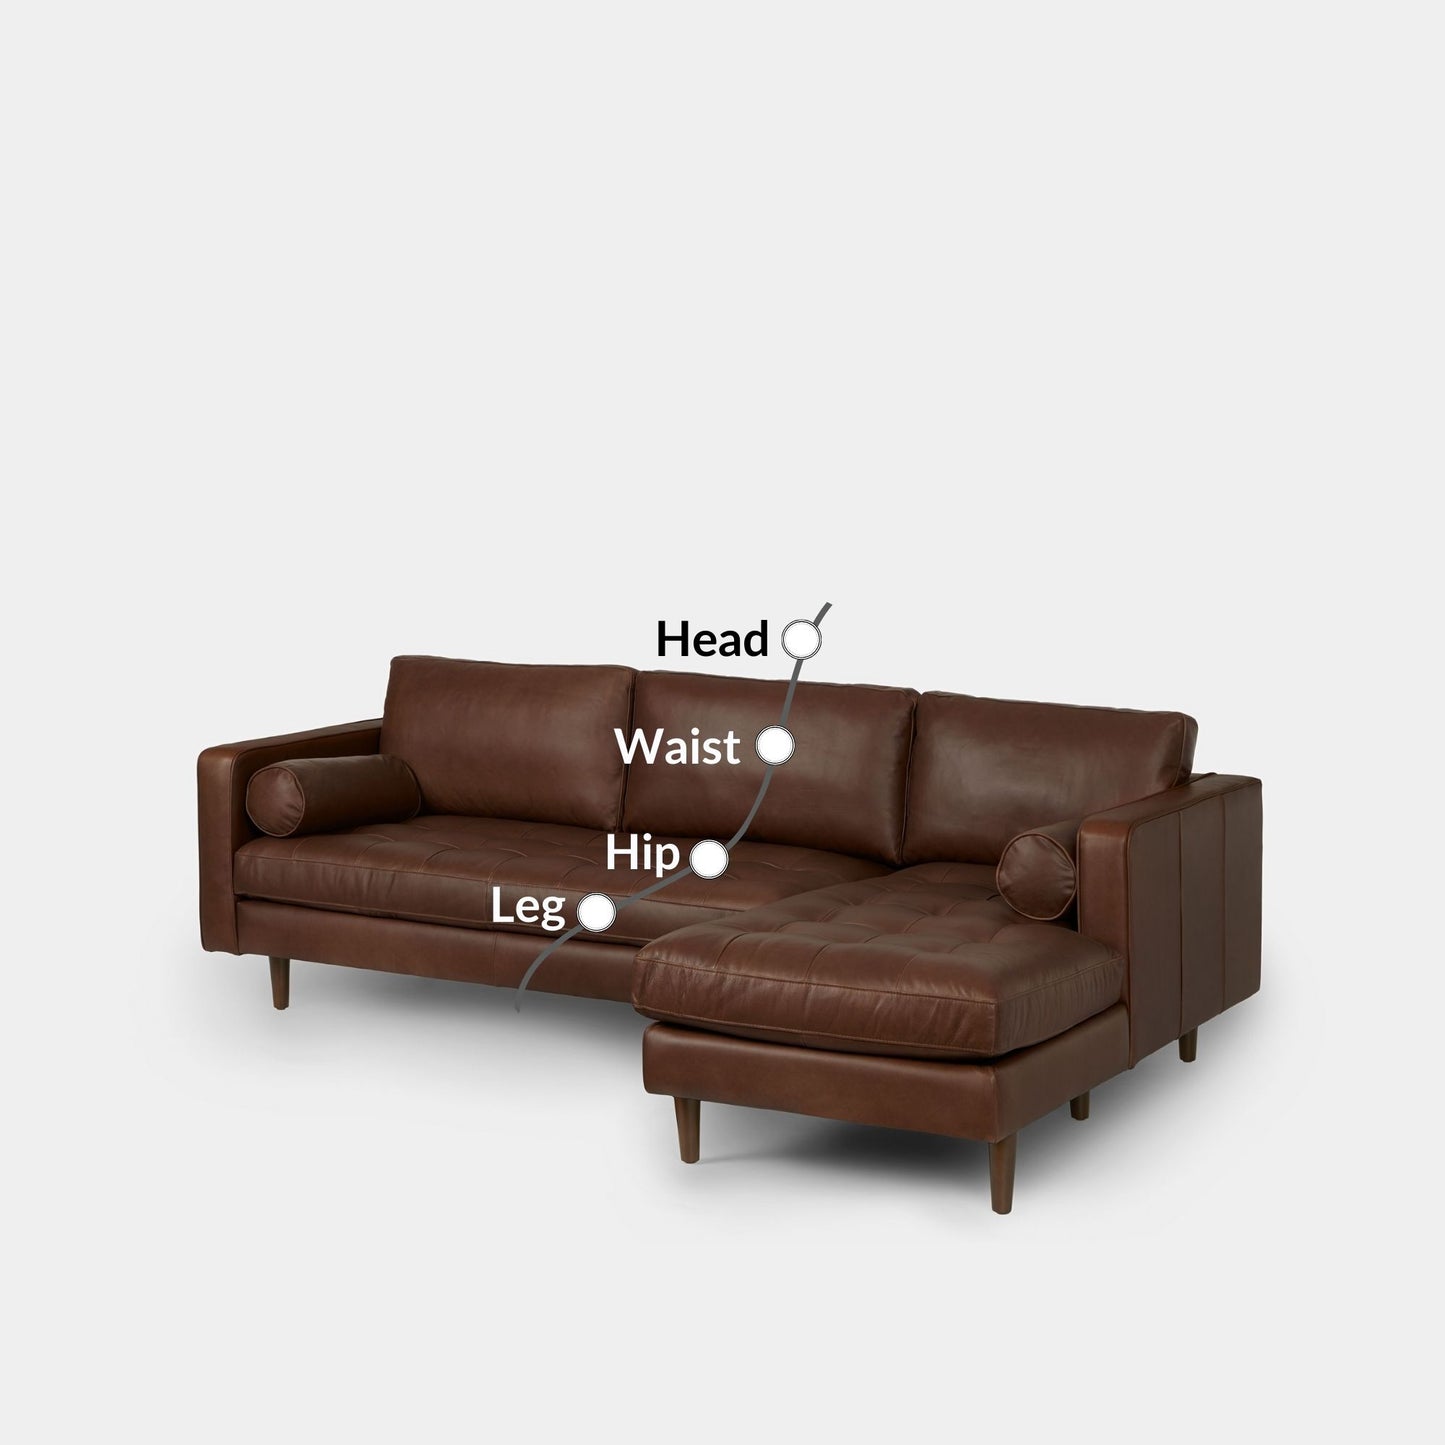 Castle leather sectional sofa right dark brown